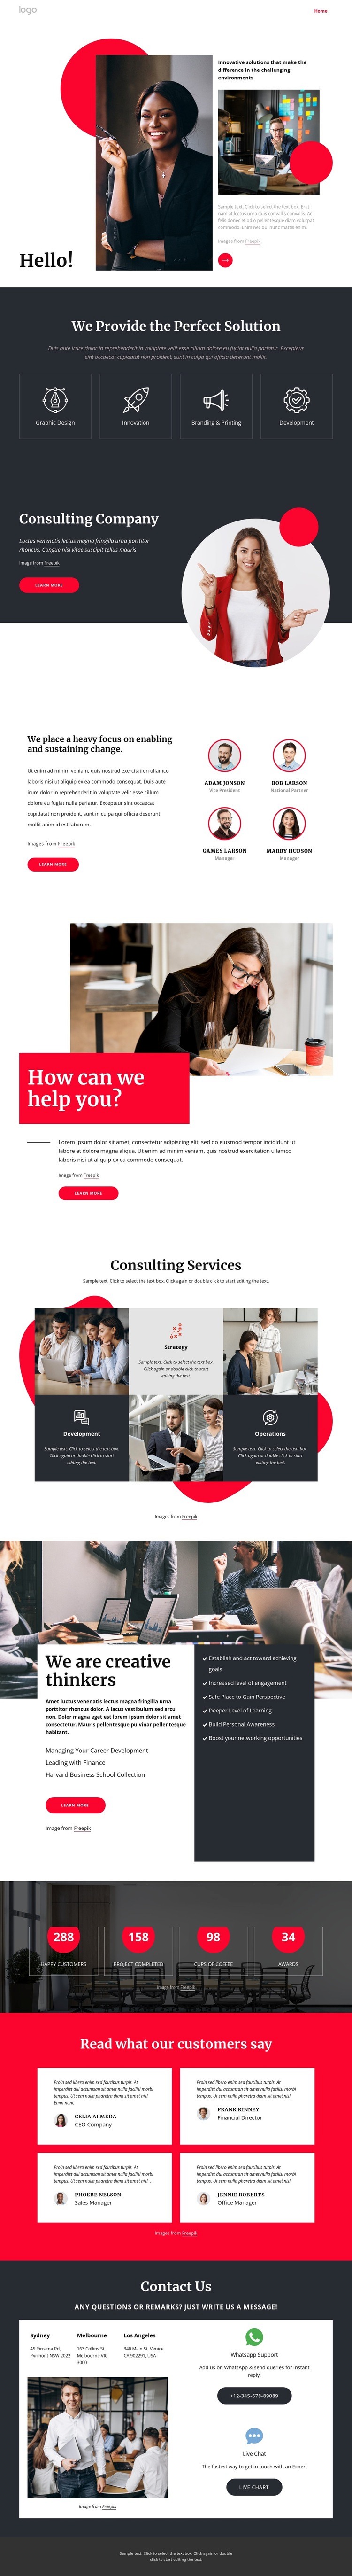 Consulting company NYC Html Code Example